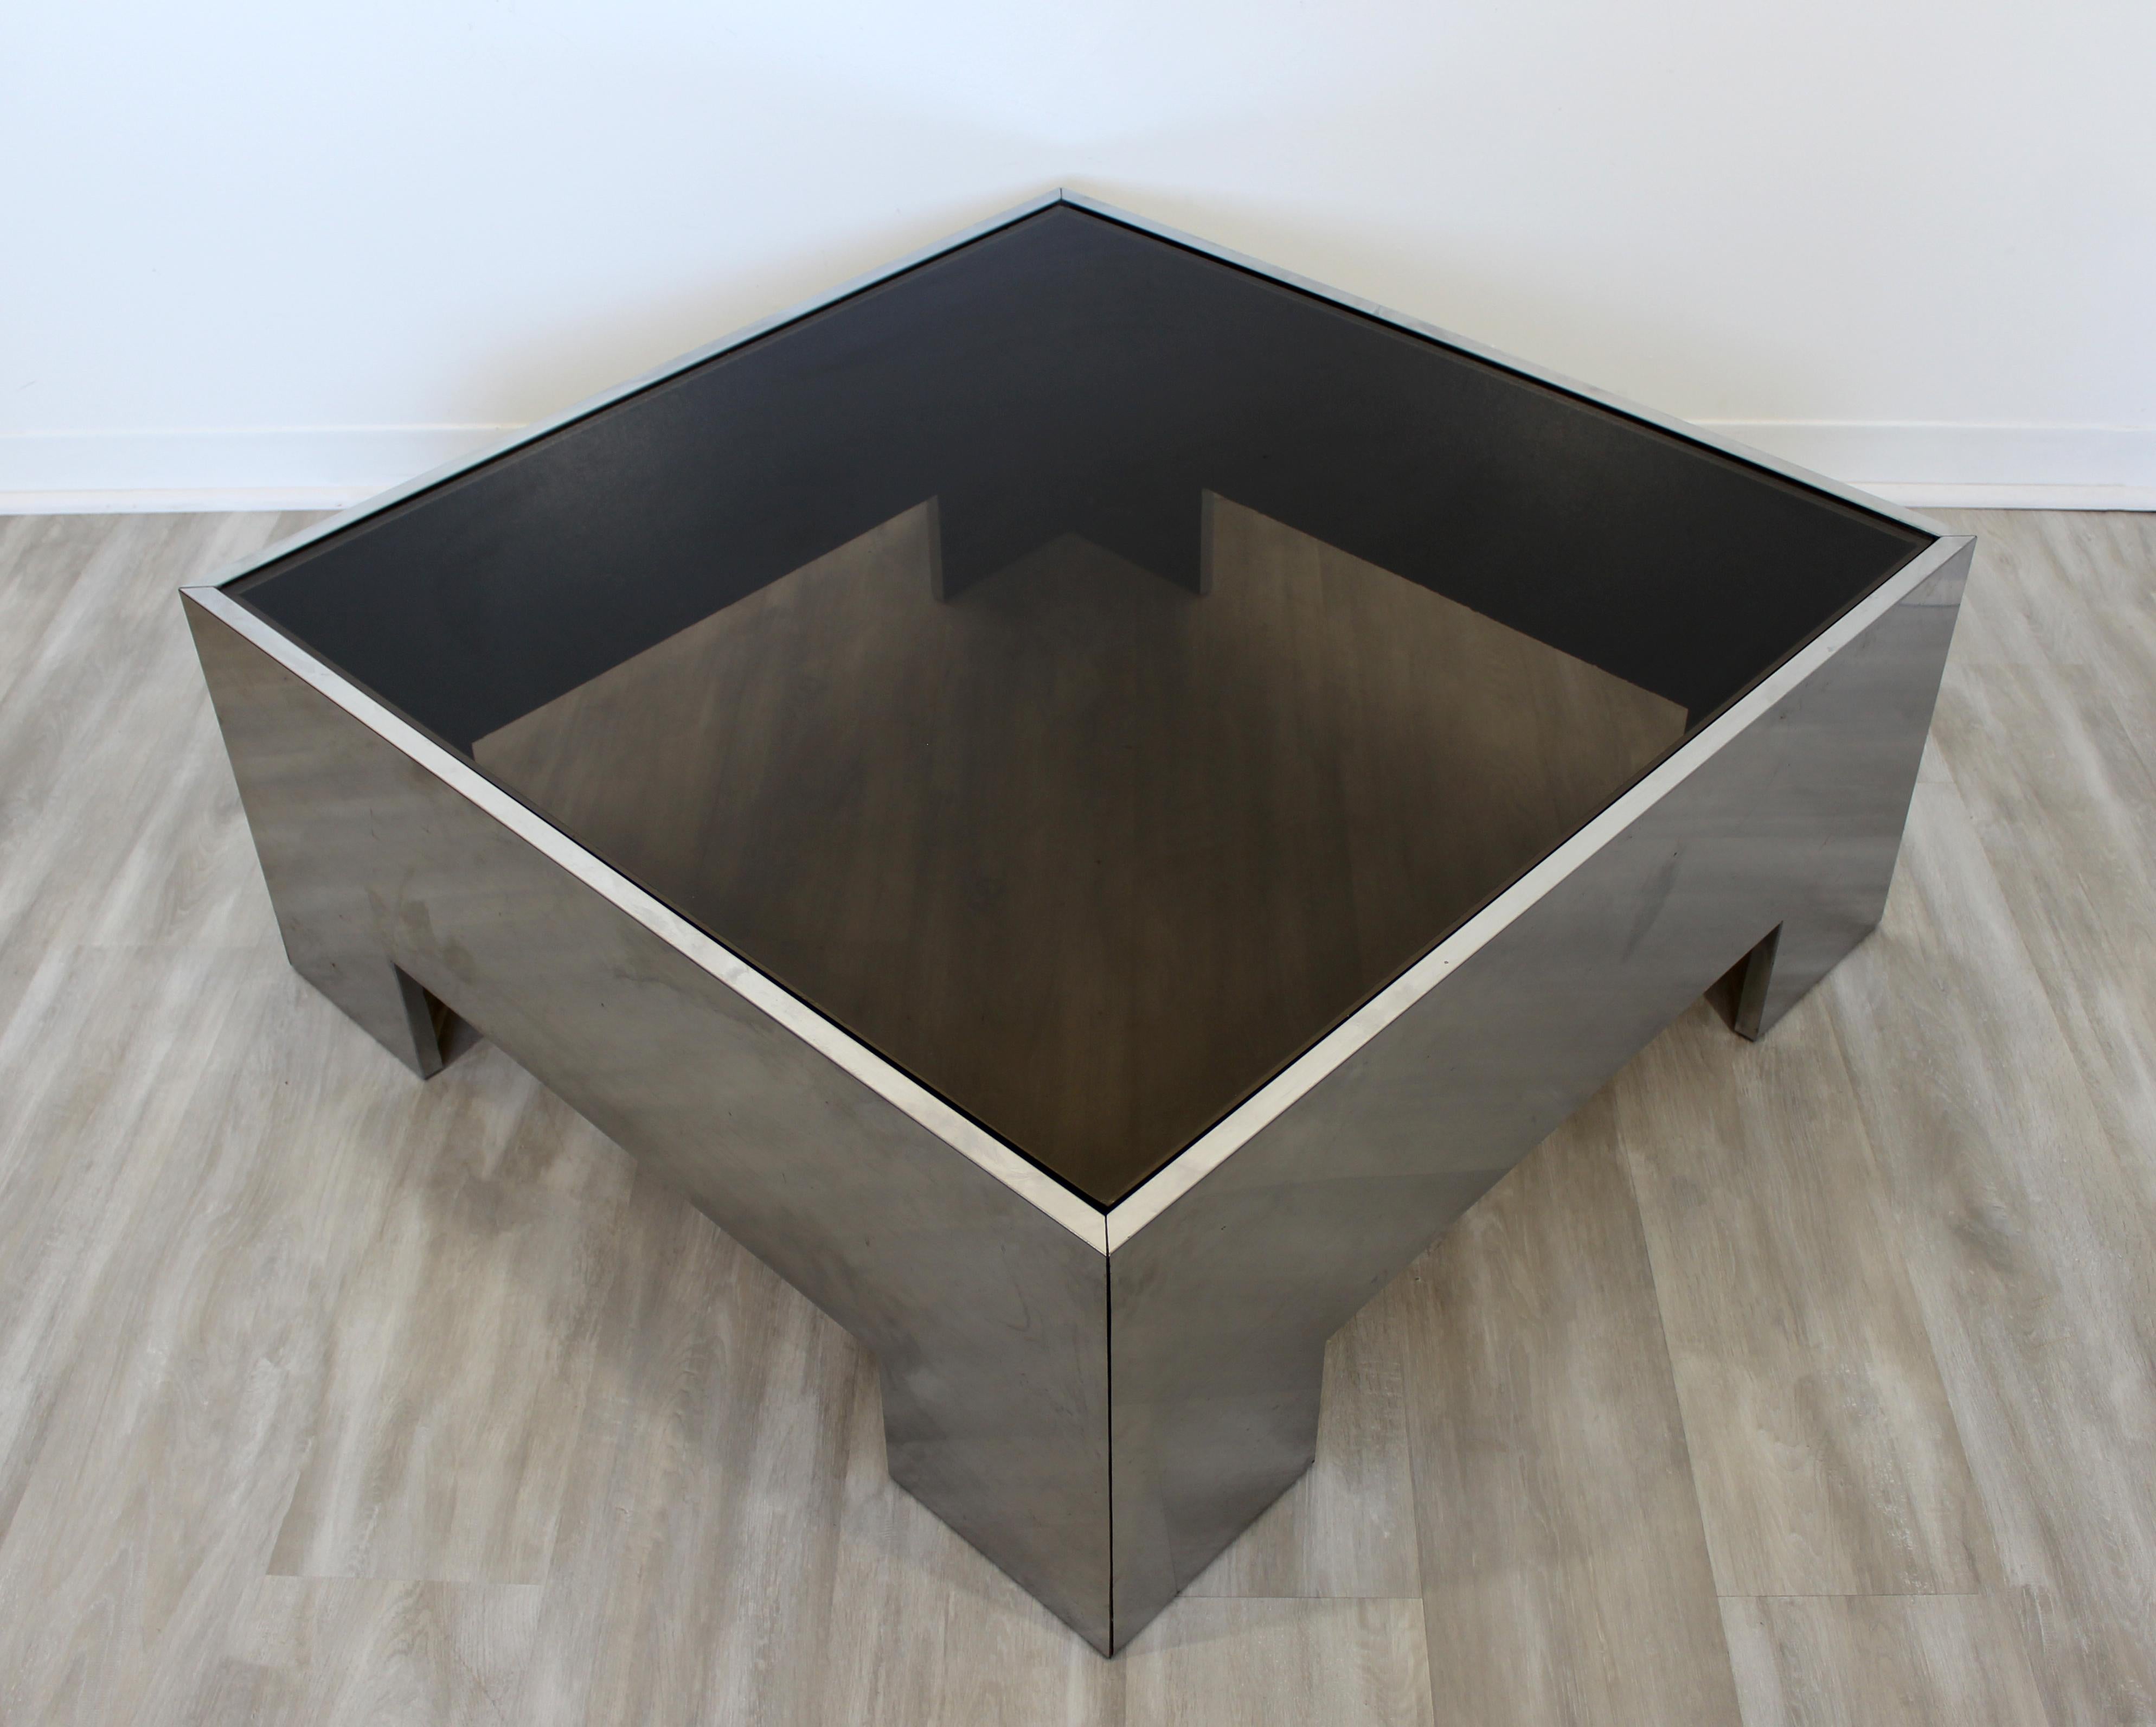 For your consideration is a fantastic, square coffee table, with a smoked glass top on a brushed aluminum base, circa the 1970s. Attributed to Brueton or Pace. In excellent vintage condition. The dimensions are 38